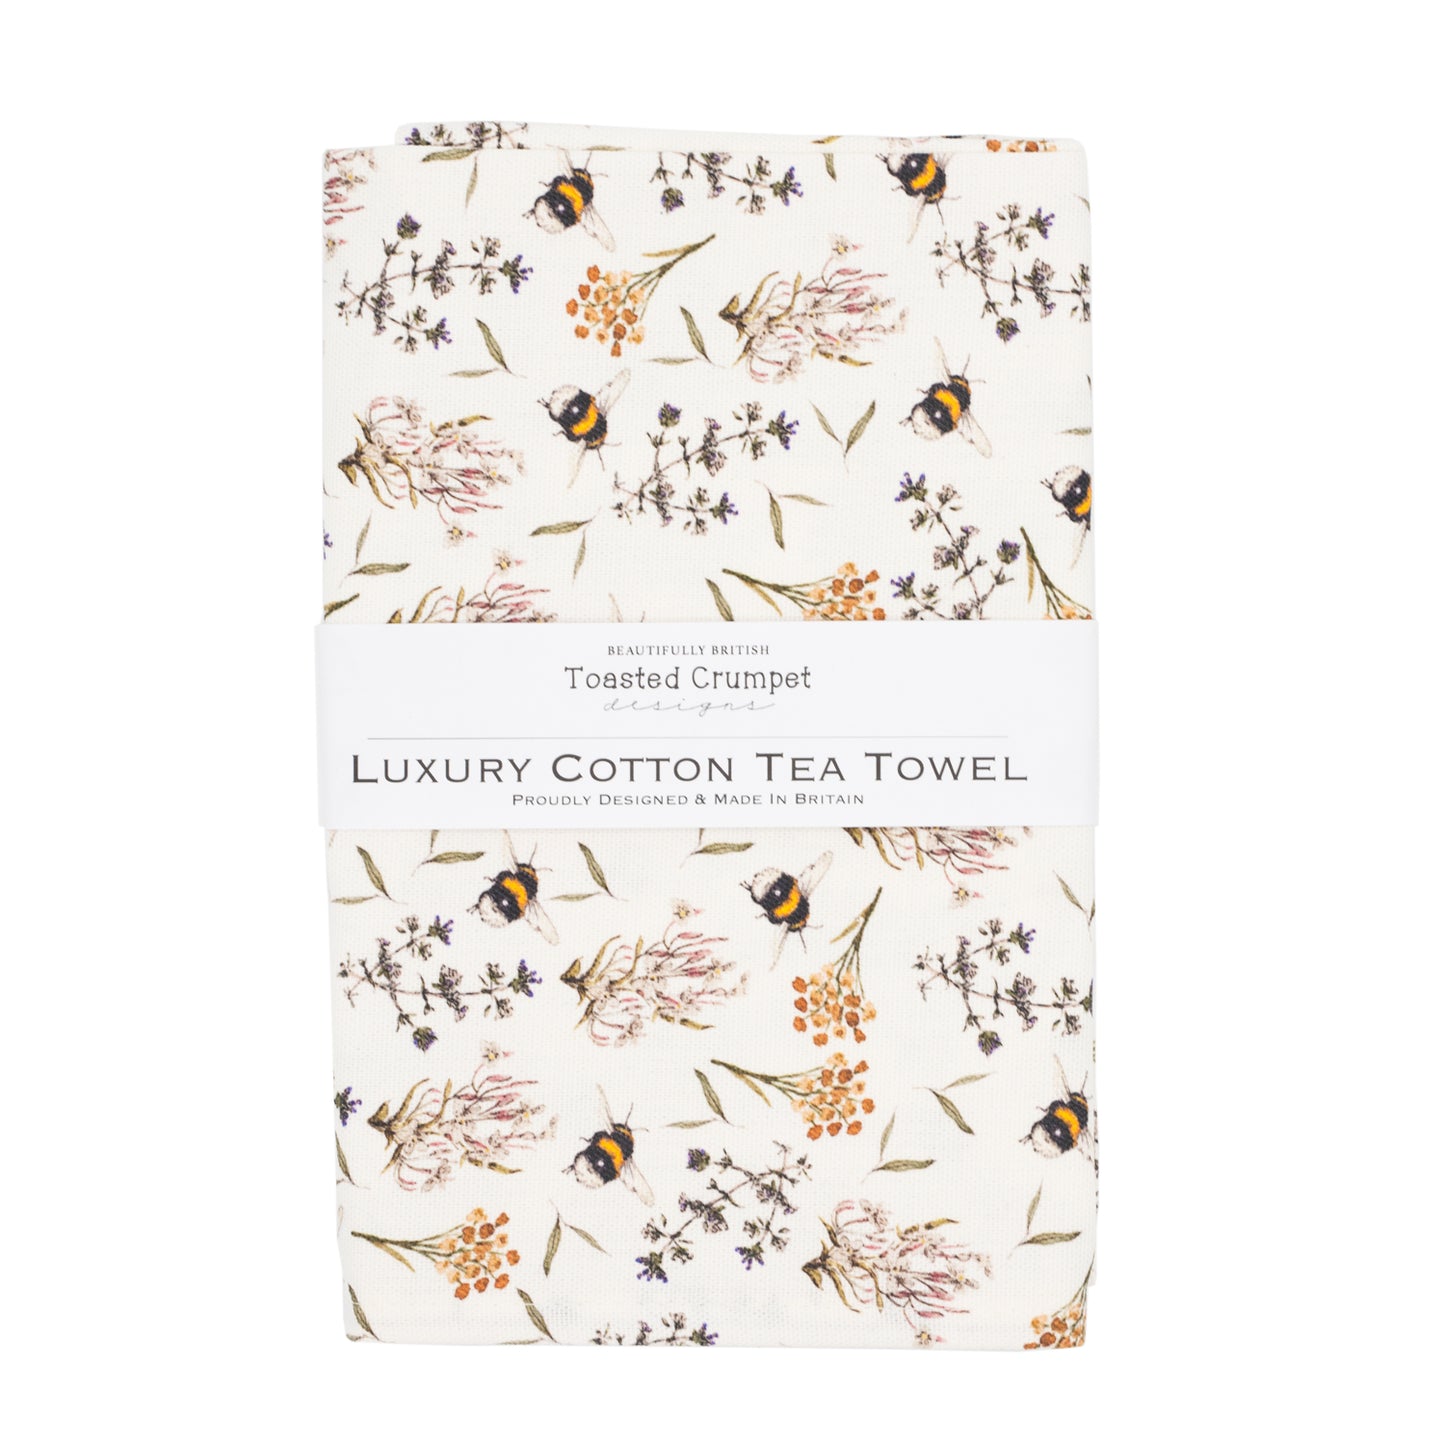 Load image into Gallery viewer, Tea towel with bee and floral pattern folded into a rectangular shape with a white belly band with Toasted Crumpet branding. Photographed against a white background.
